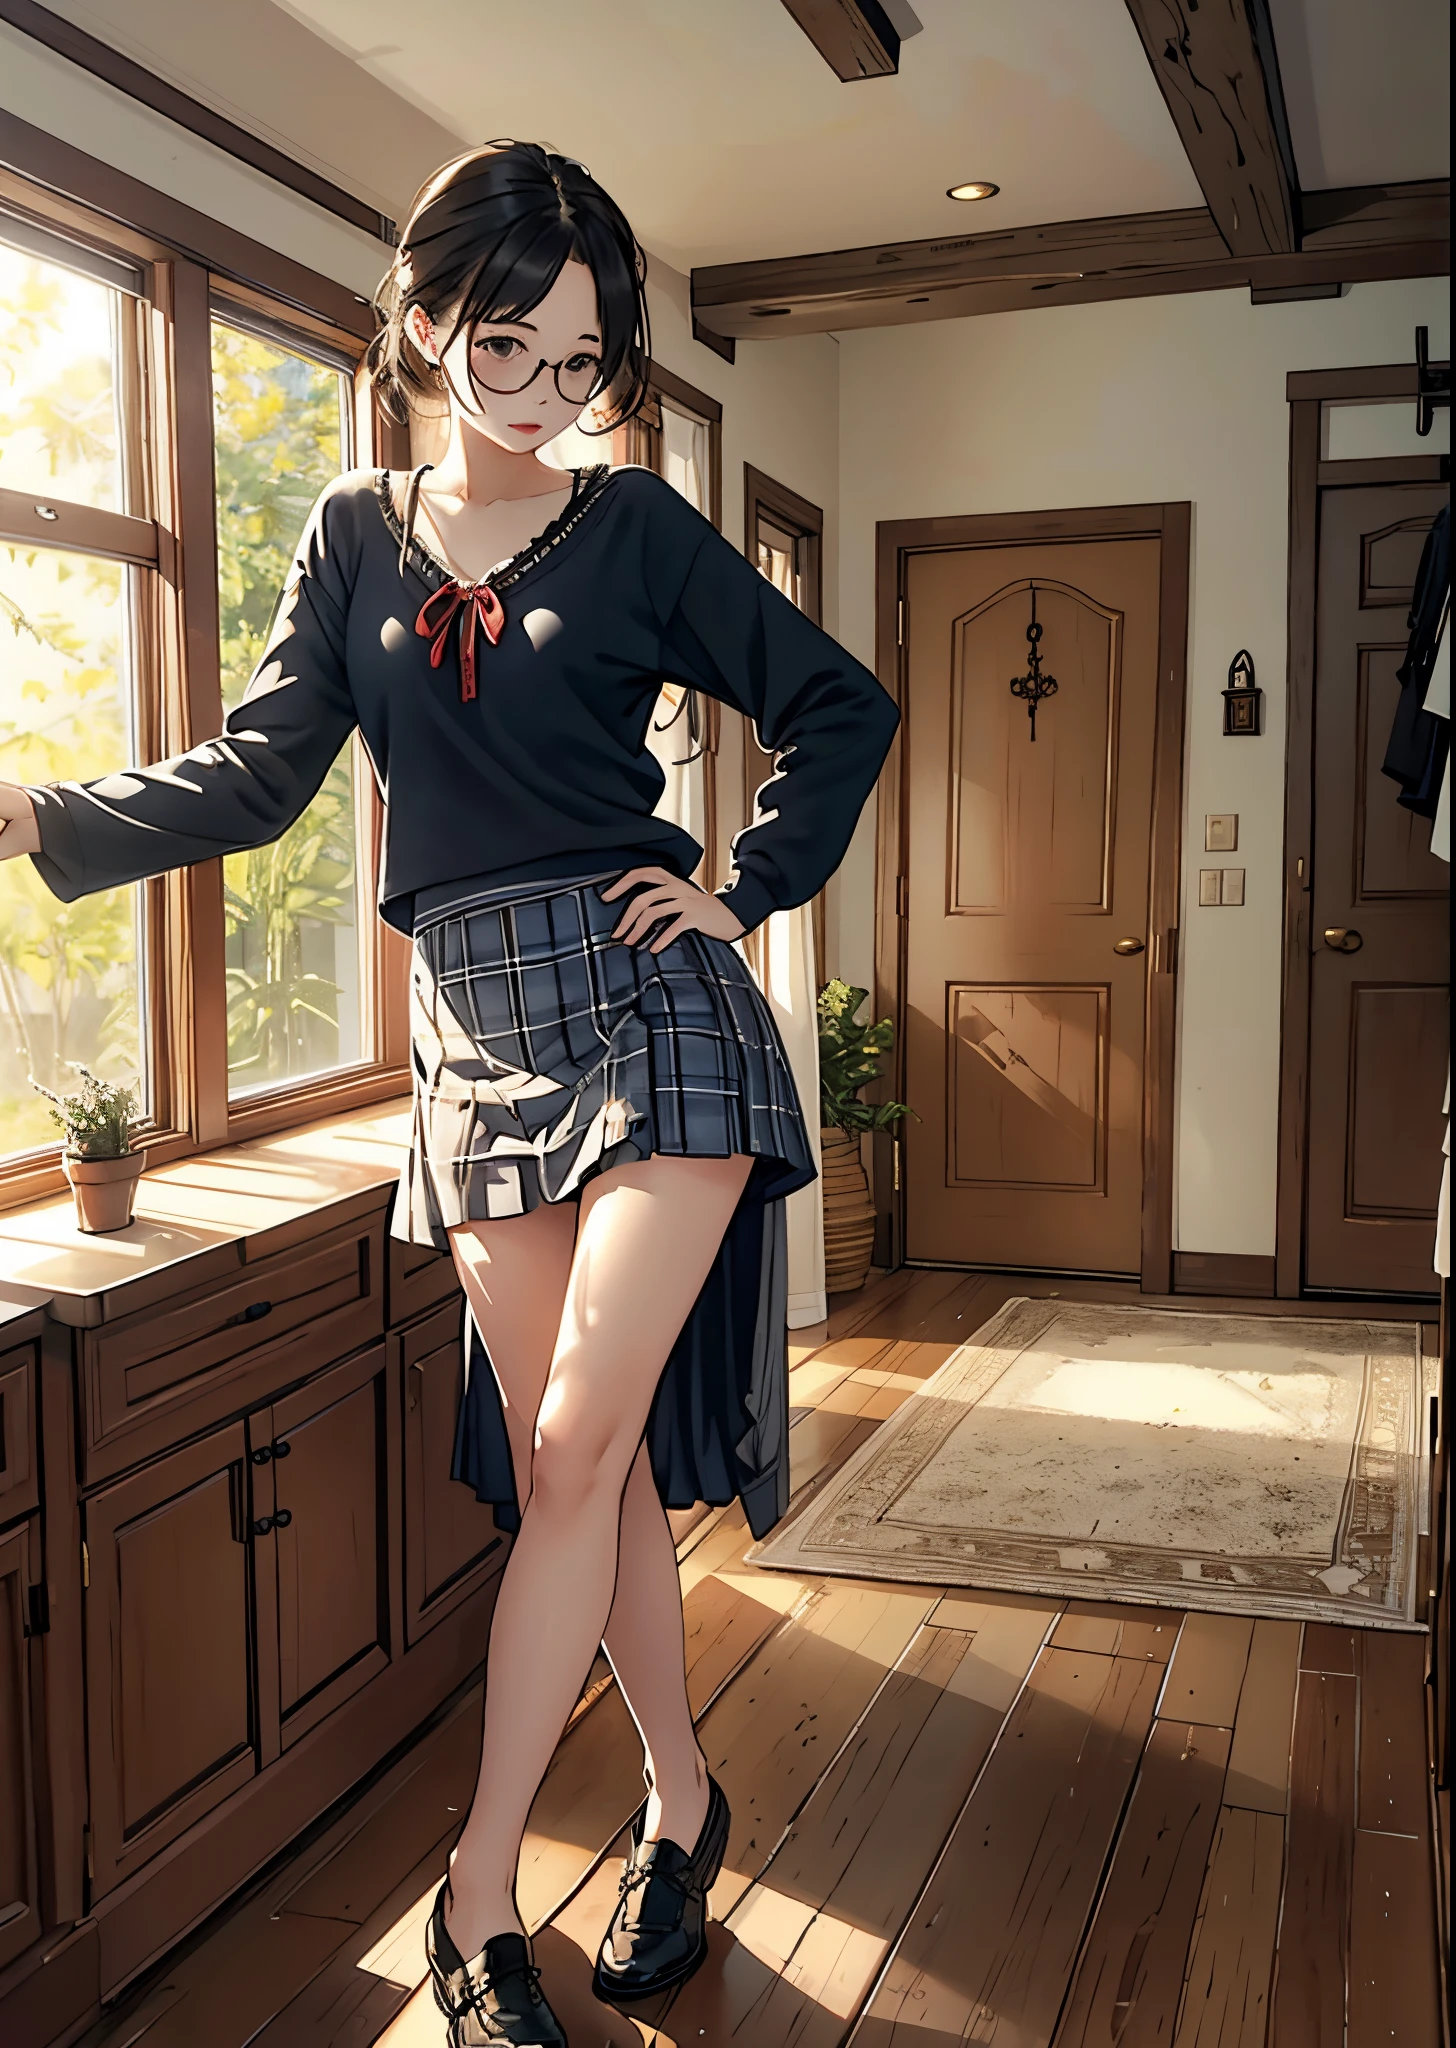 Full body photo of beautiful  sexy woman wearing round glasses、vila、Country、inside the house、Playfulness、greed、up skirt、Adults、friendly、middlebreast、nsfw,windy up skirt、